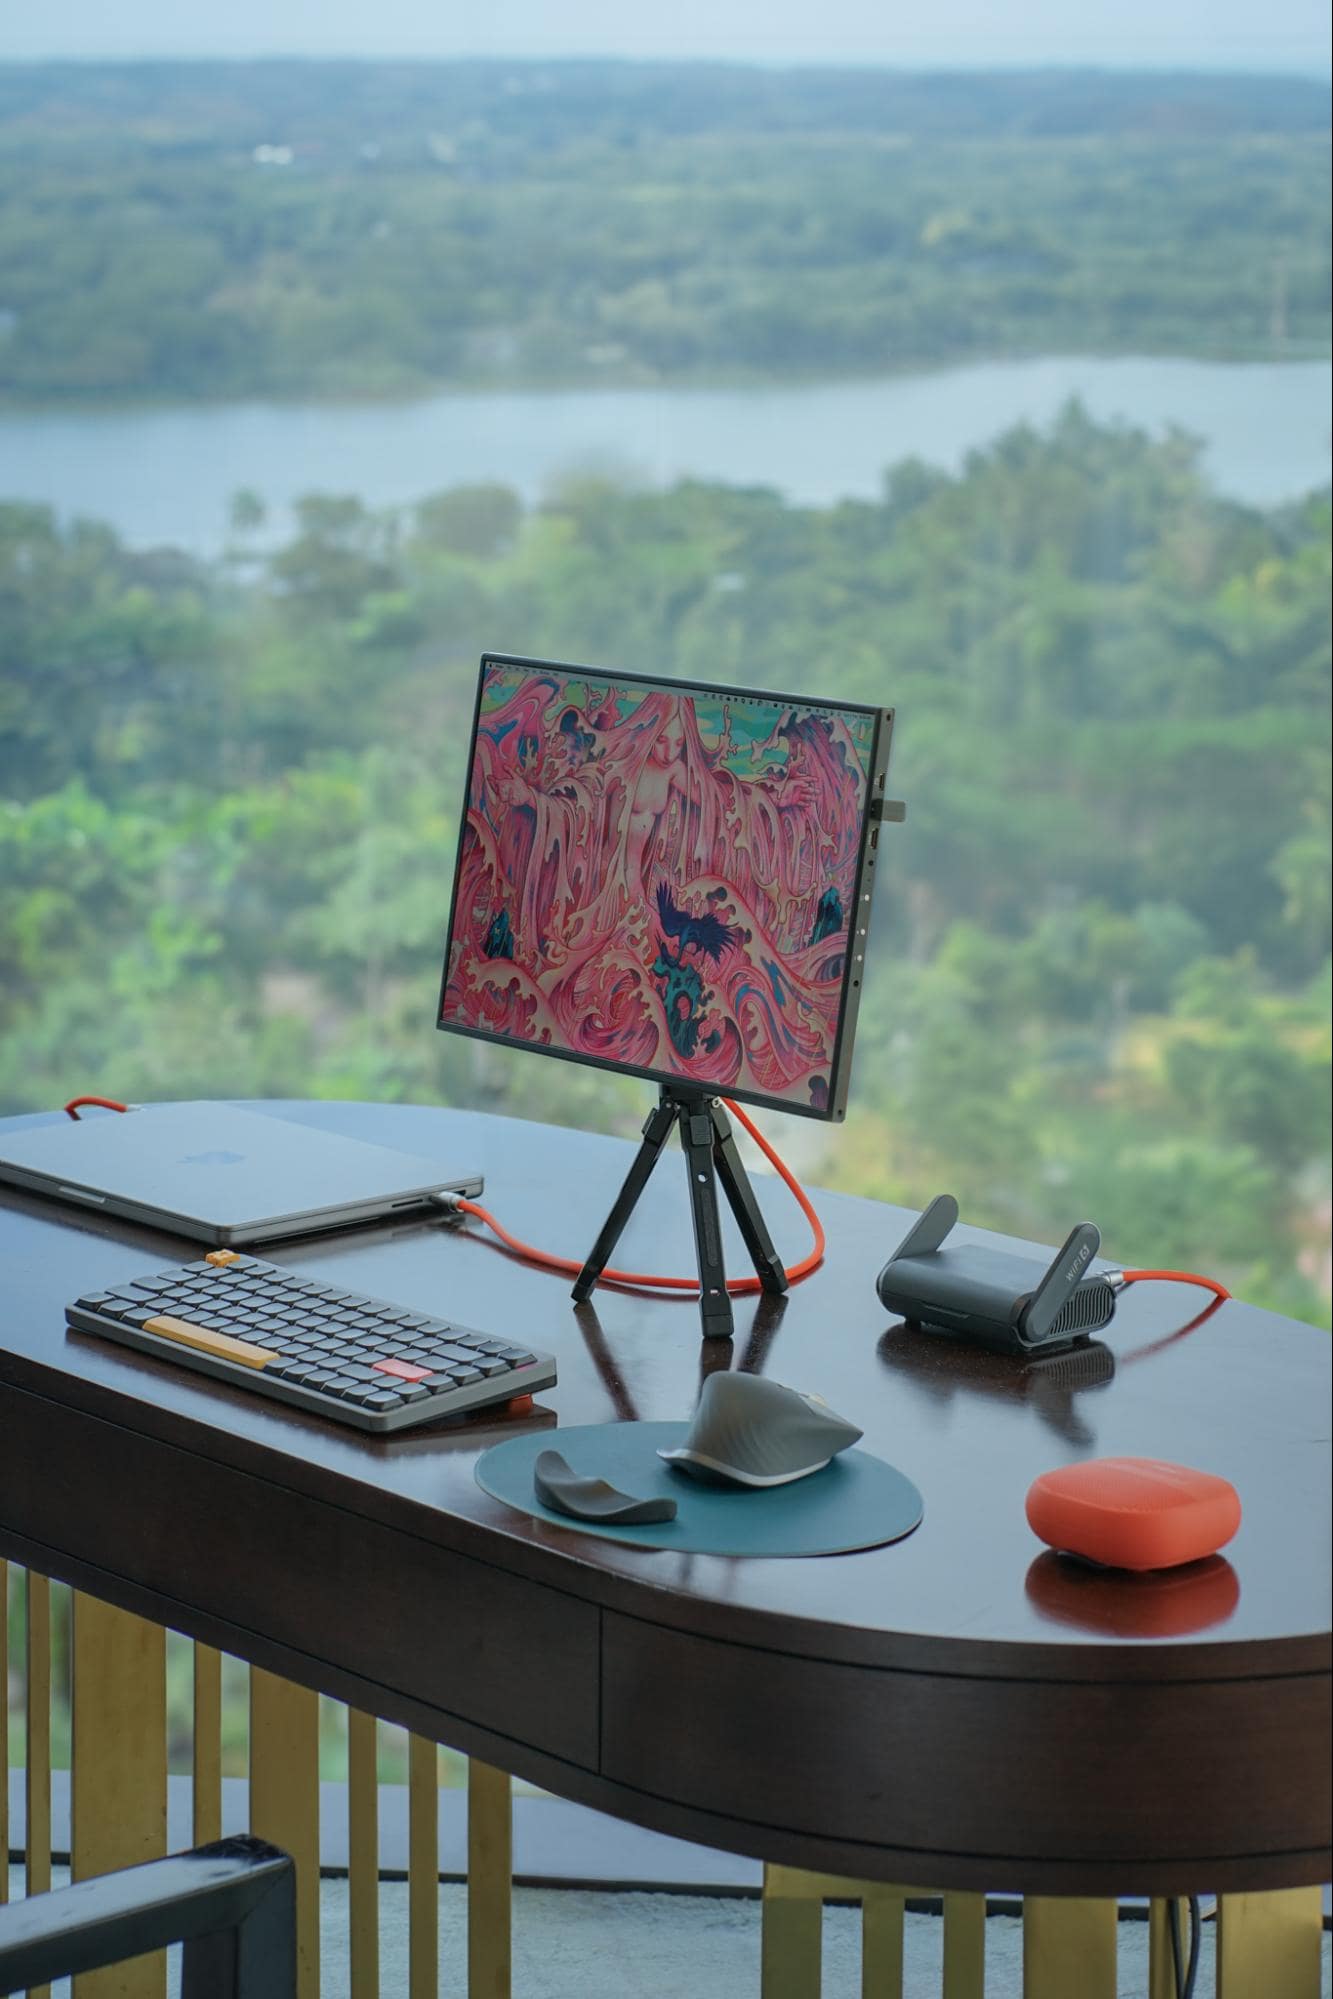 A serene desk setup with a scenic backdrop, featuring a laptop, a graphic tablet on a tripod stand, a mechanical keyboard, and a portable speaker, all neatly arranged on an oval table with a picturesque lake and lush greenery in the distance